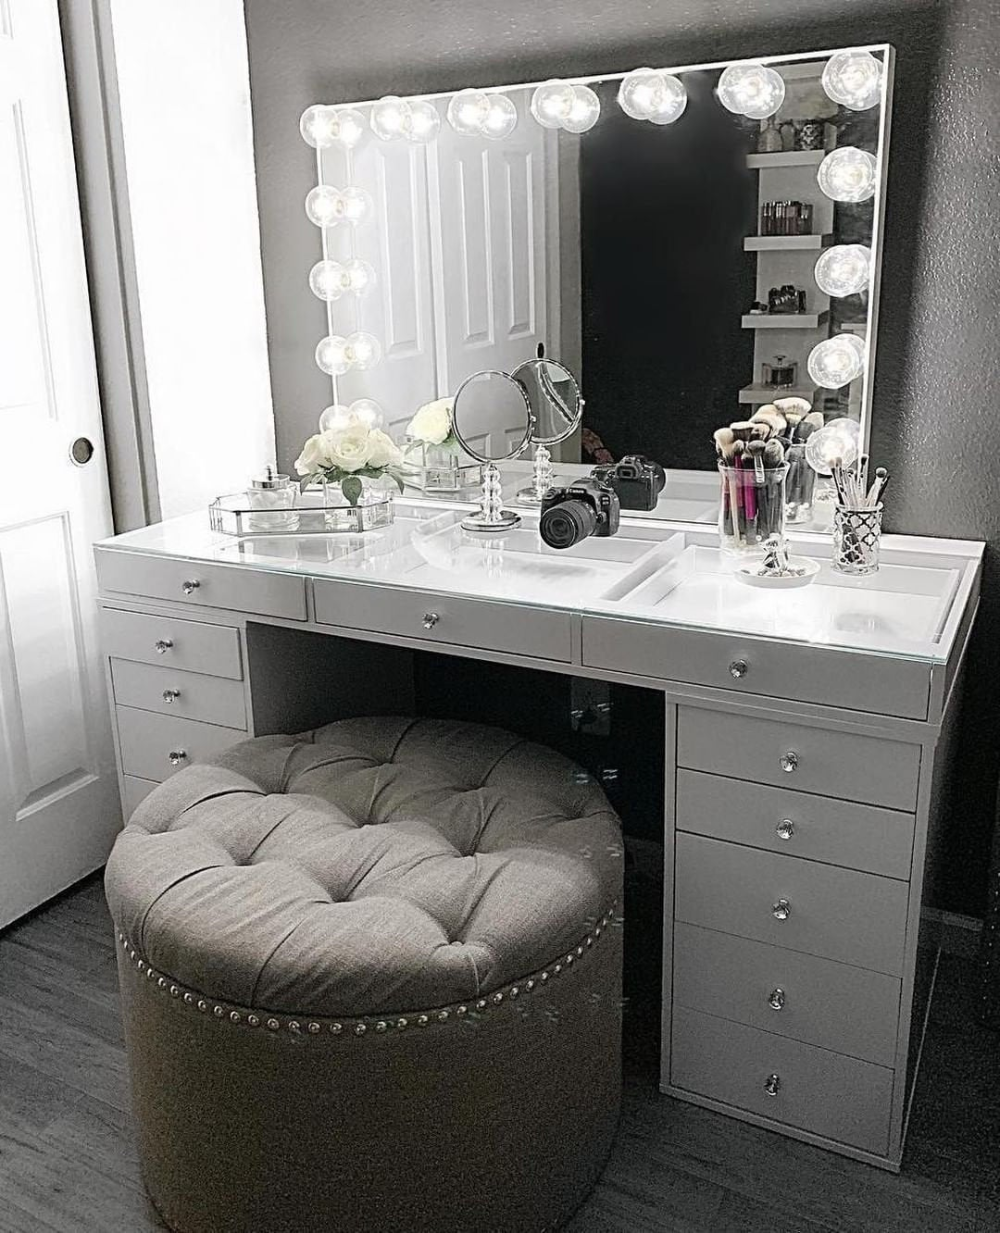 Hollywood Makeup Vanity Mirror with Lights-Impressions Vanity Glow Pro Makeup Vanity Mirror with Dimmer Lights for Tabletop or Wall Mounted -   15 makeup Vanity design ideas